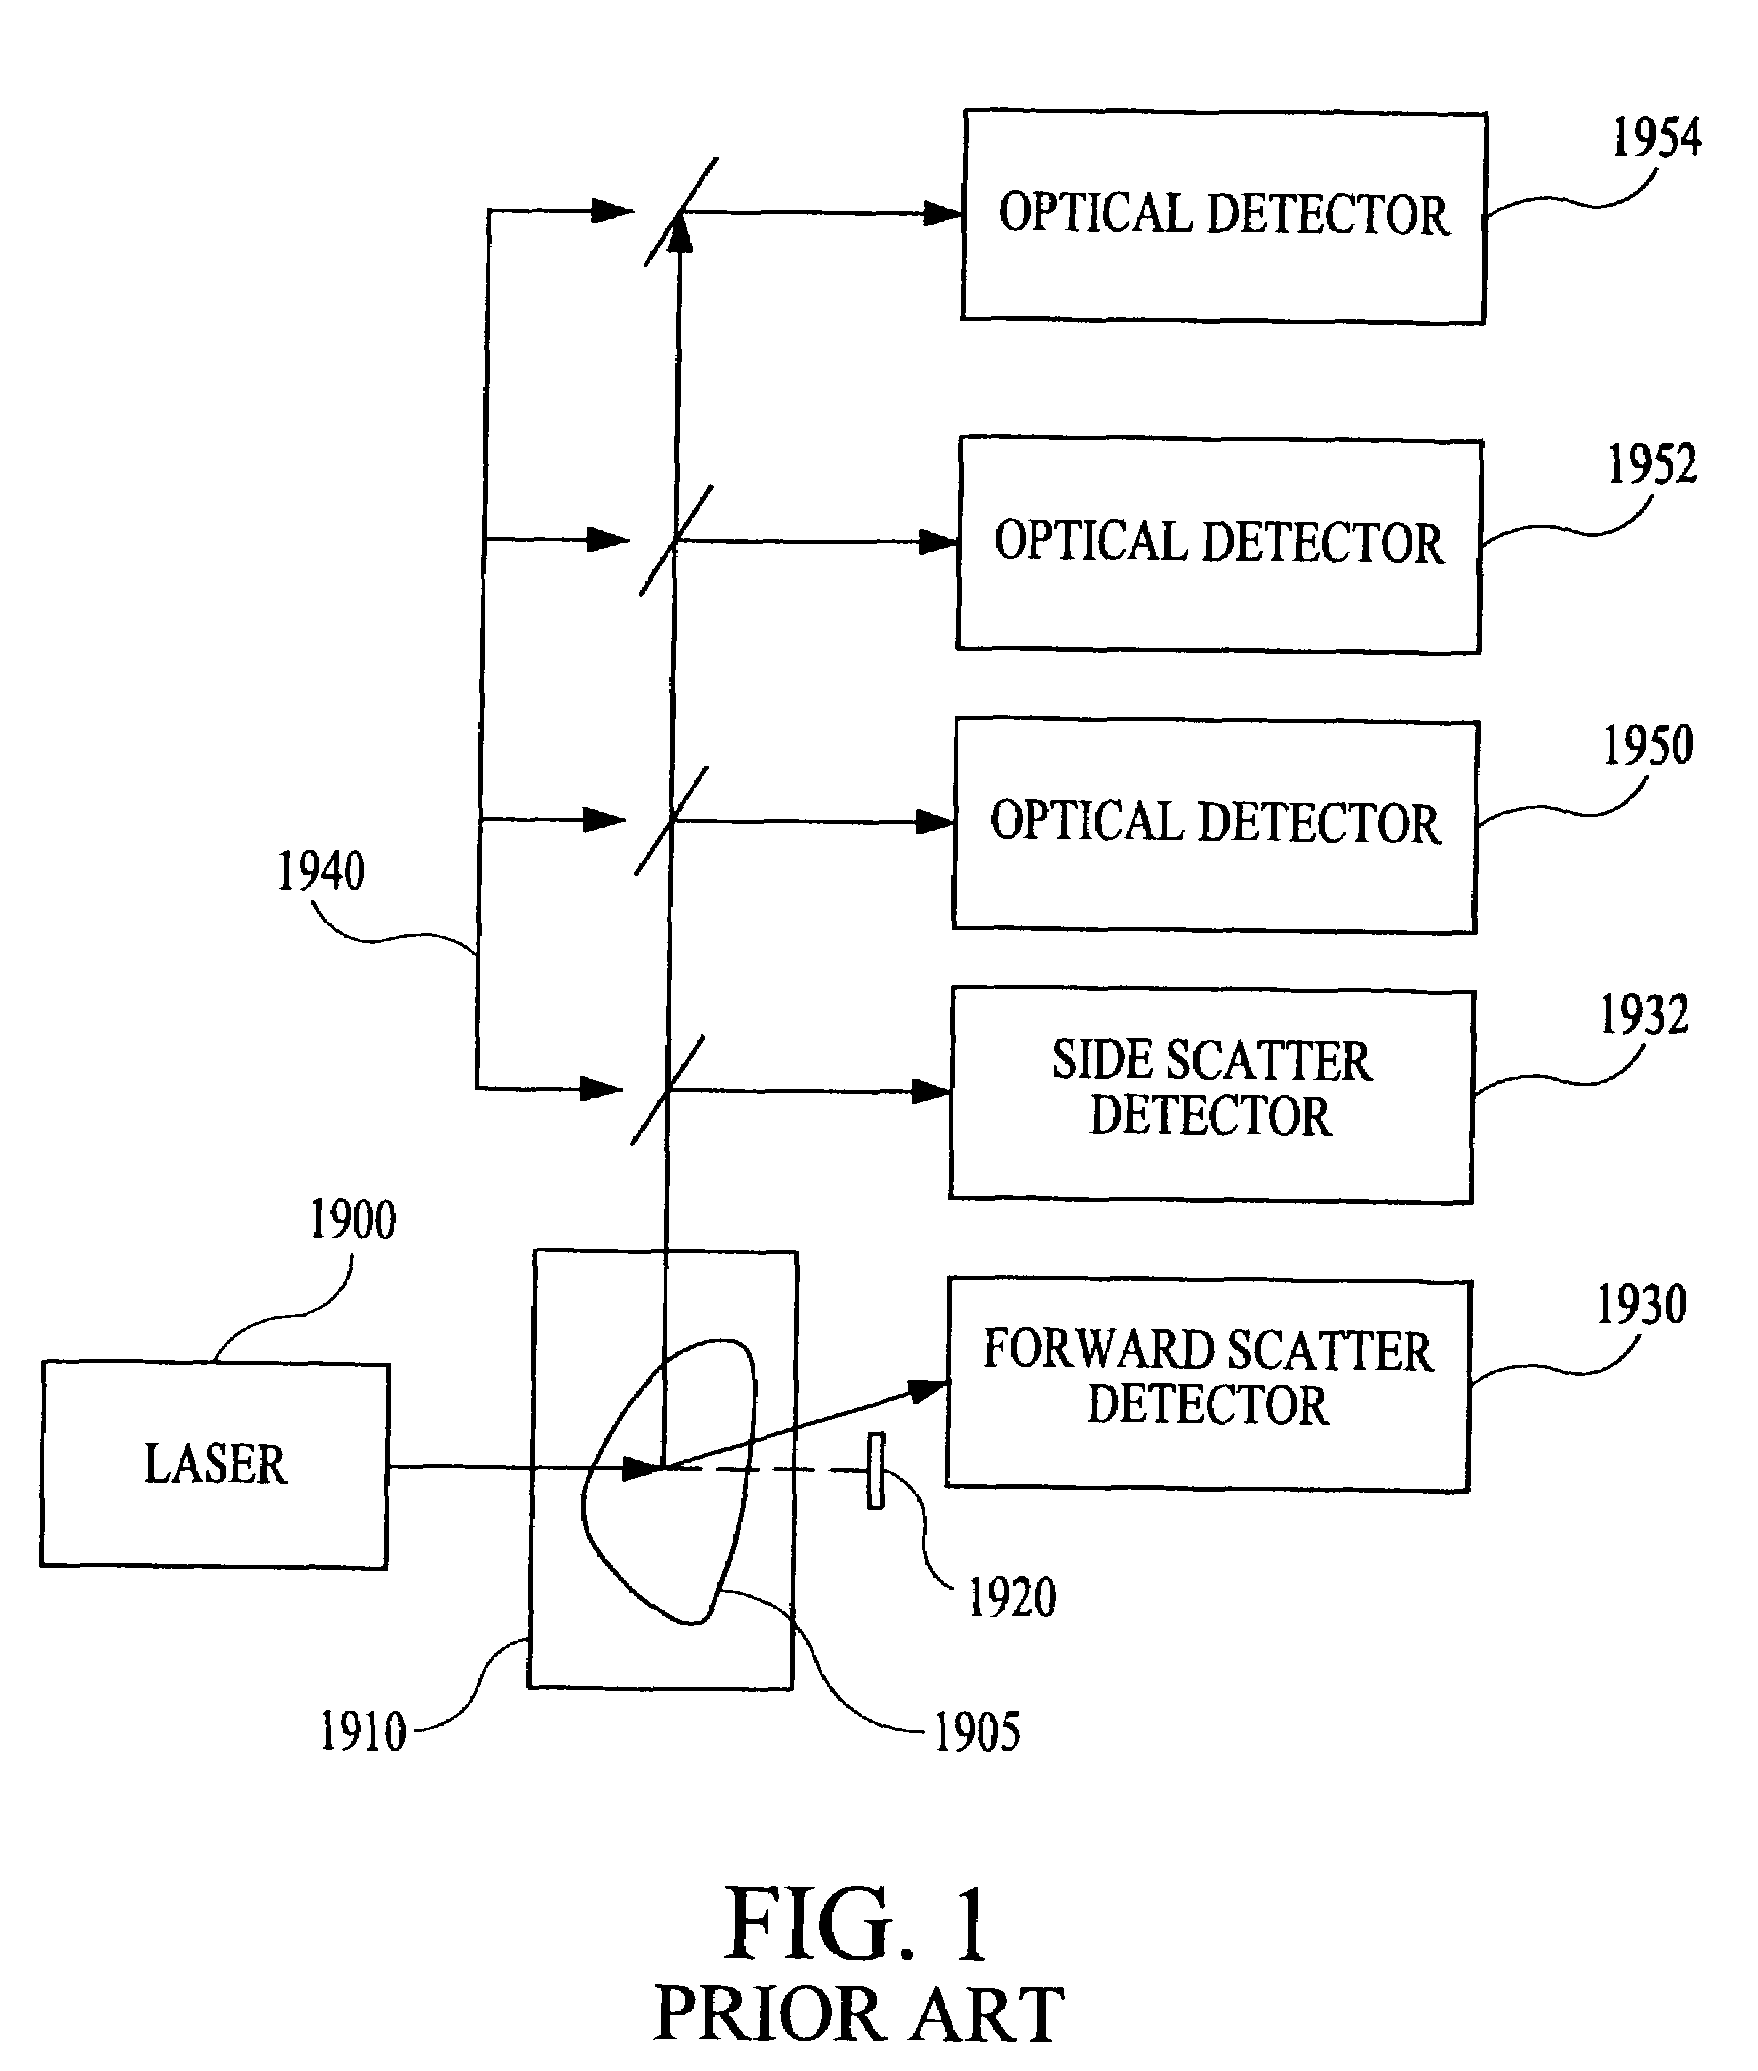 Multi-analyte diagnostic system and computer implemented process for same